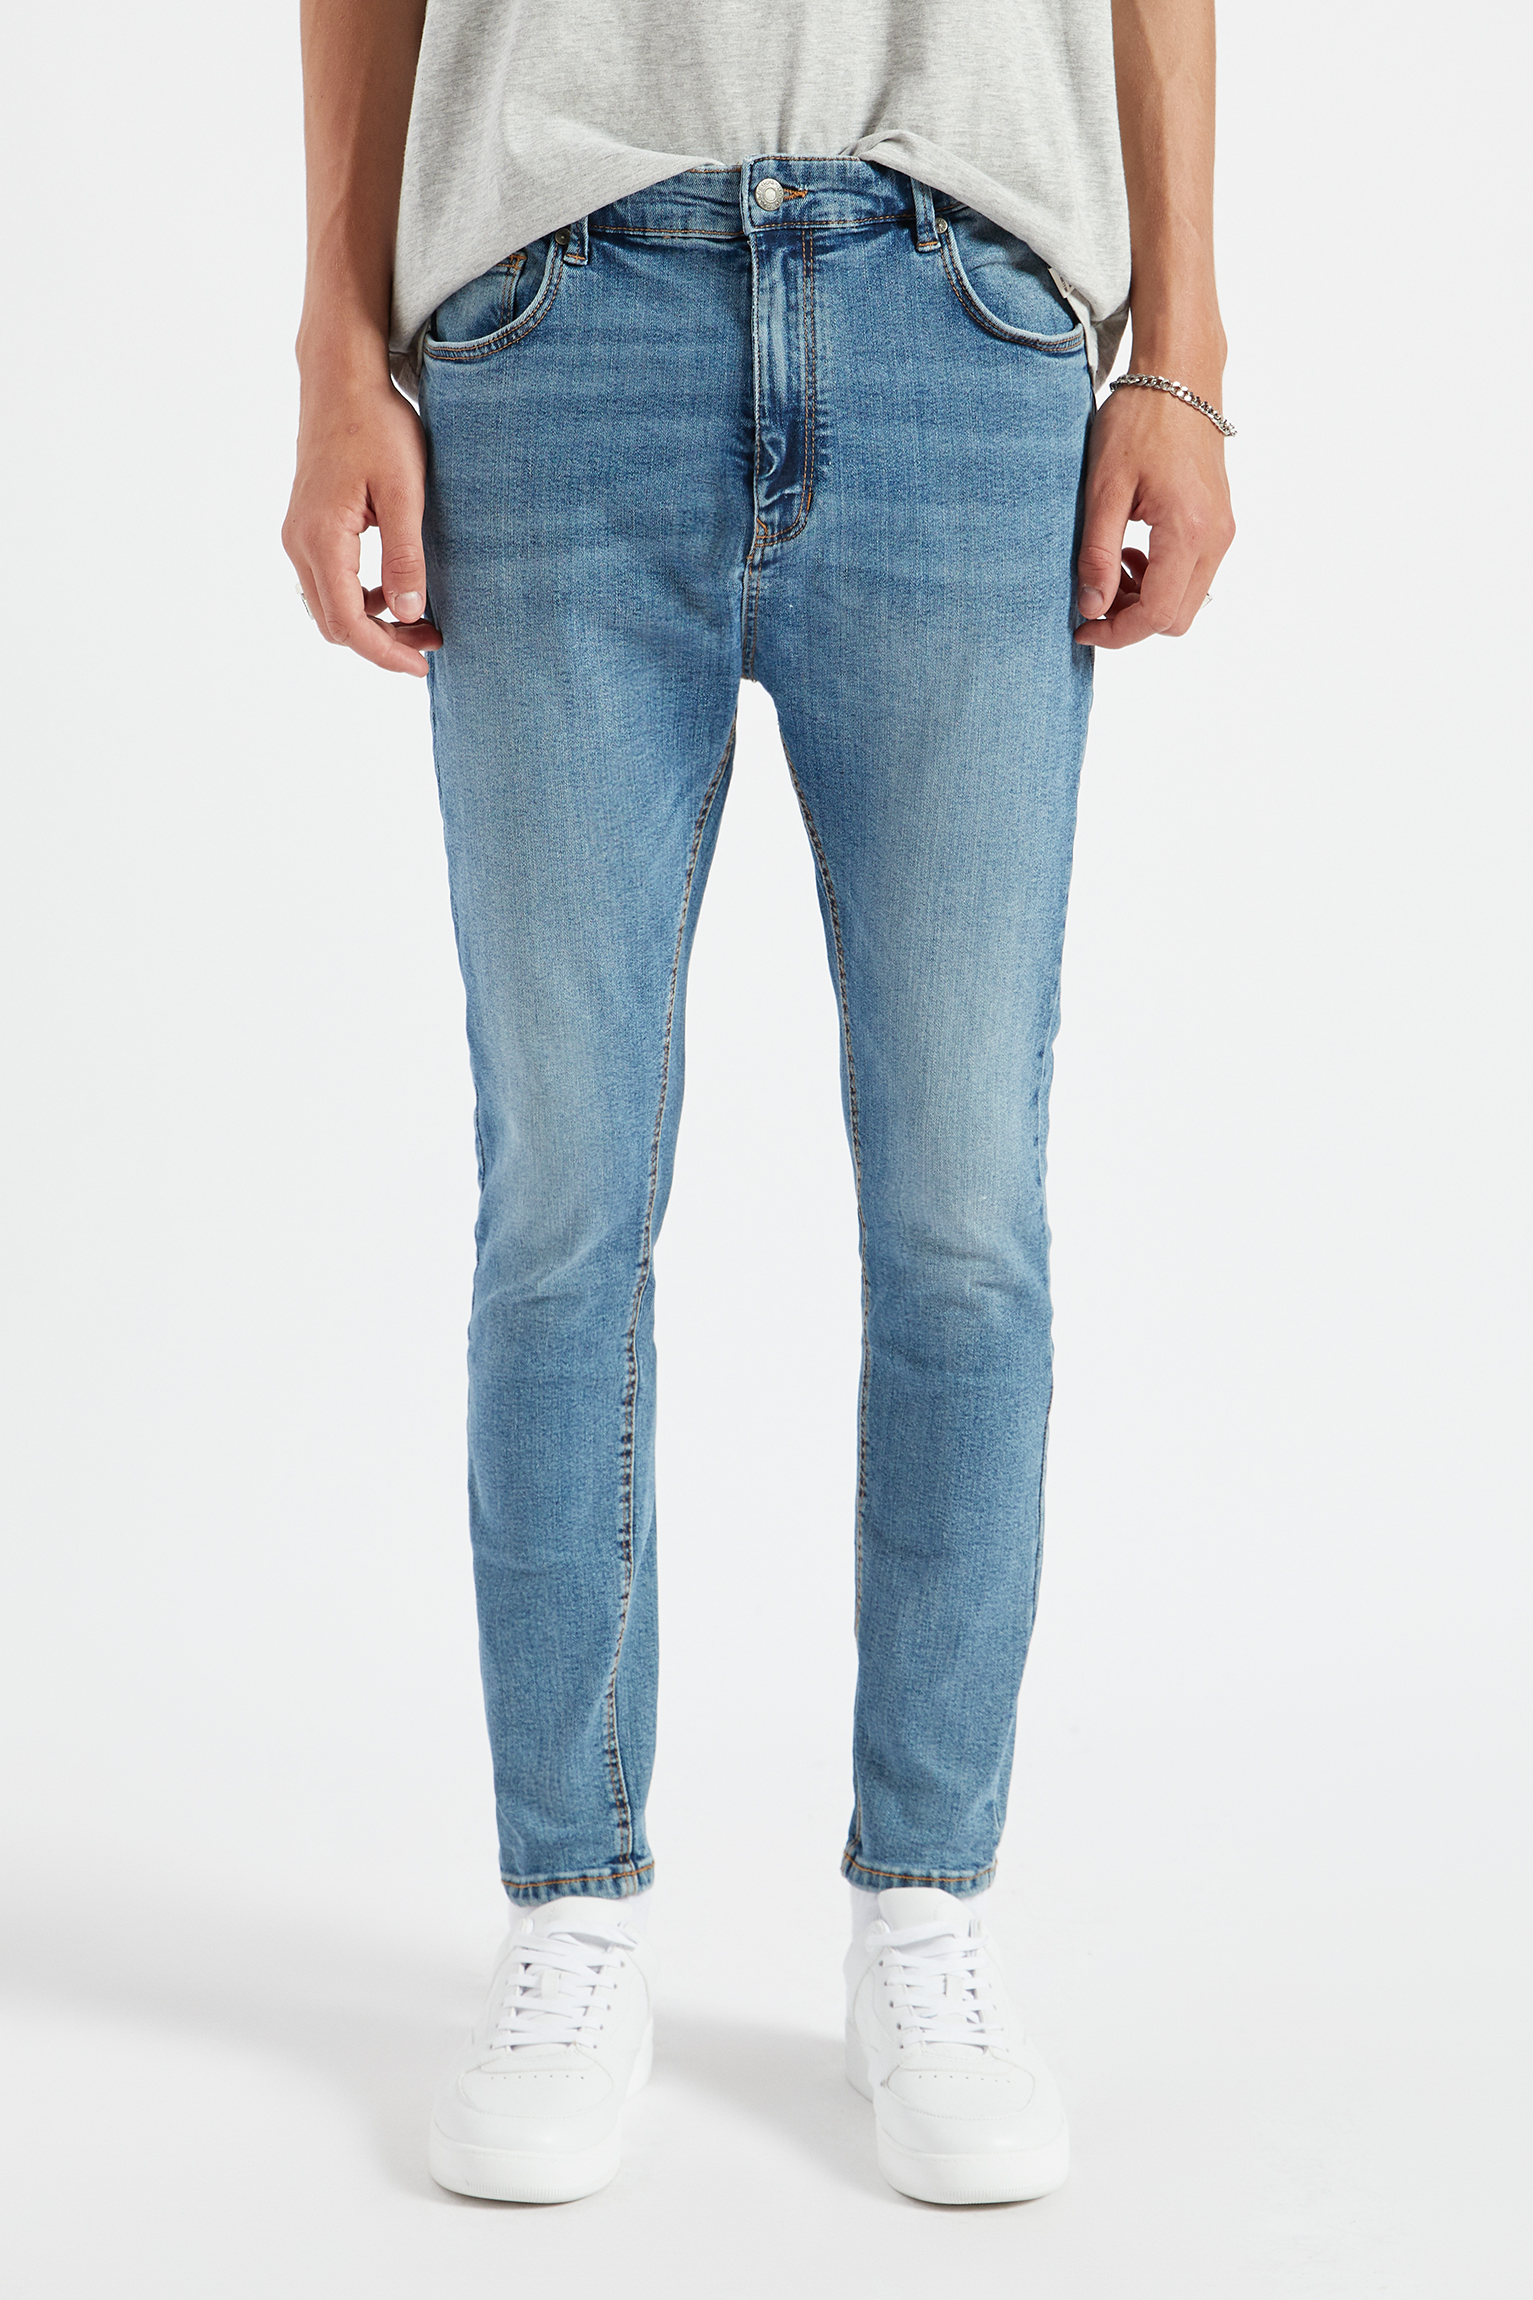 Carrot jeans - Jeans - Clothing - Man 